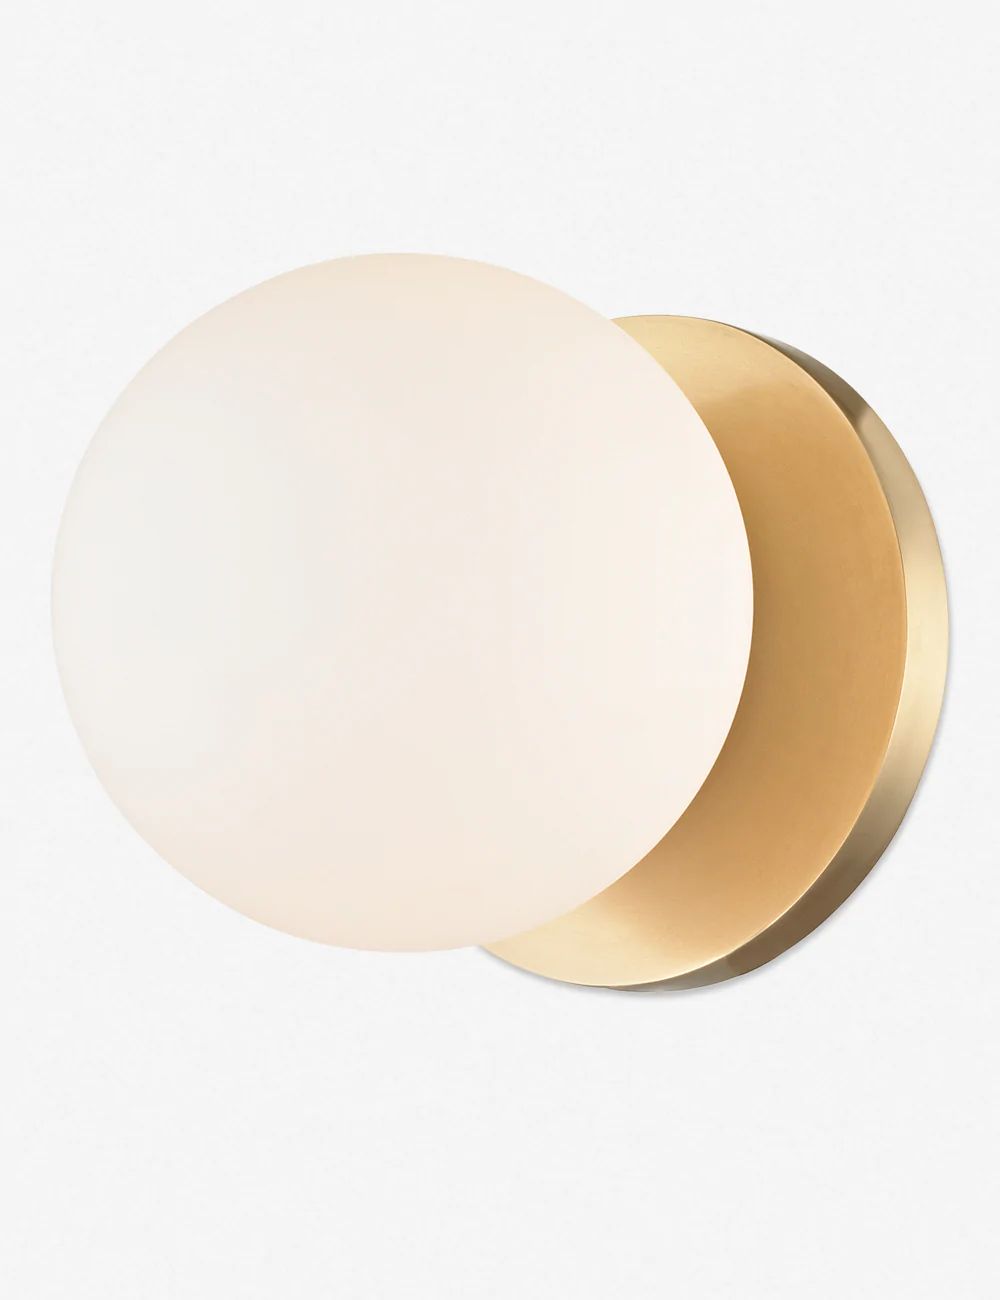 Boden Sconce | Lulu and Georgia 